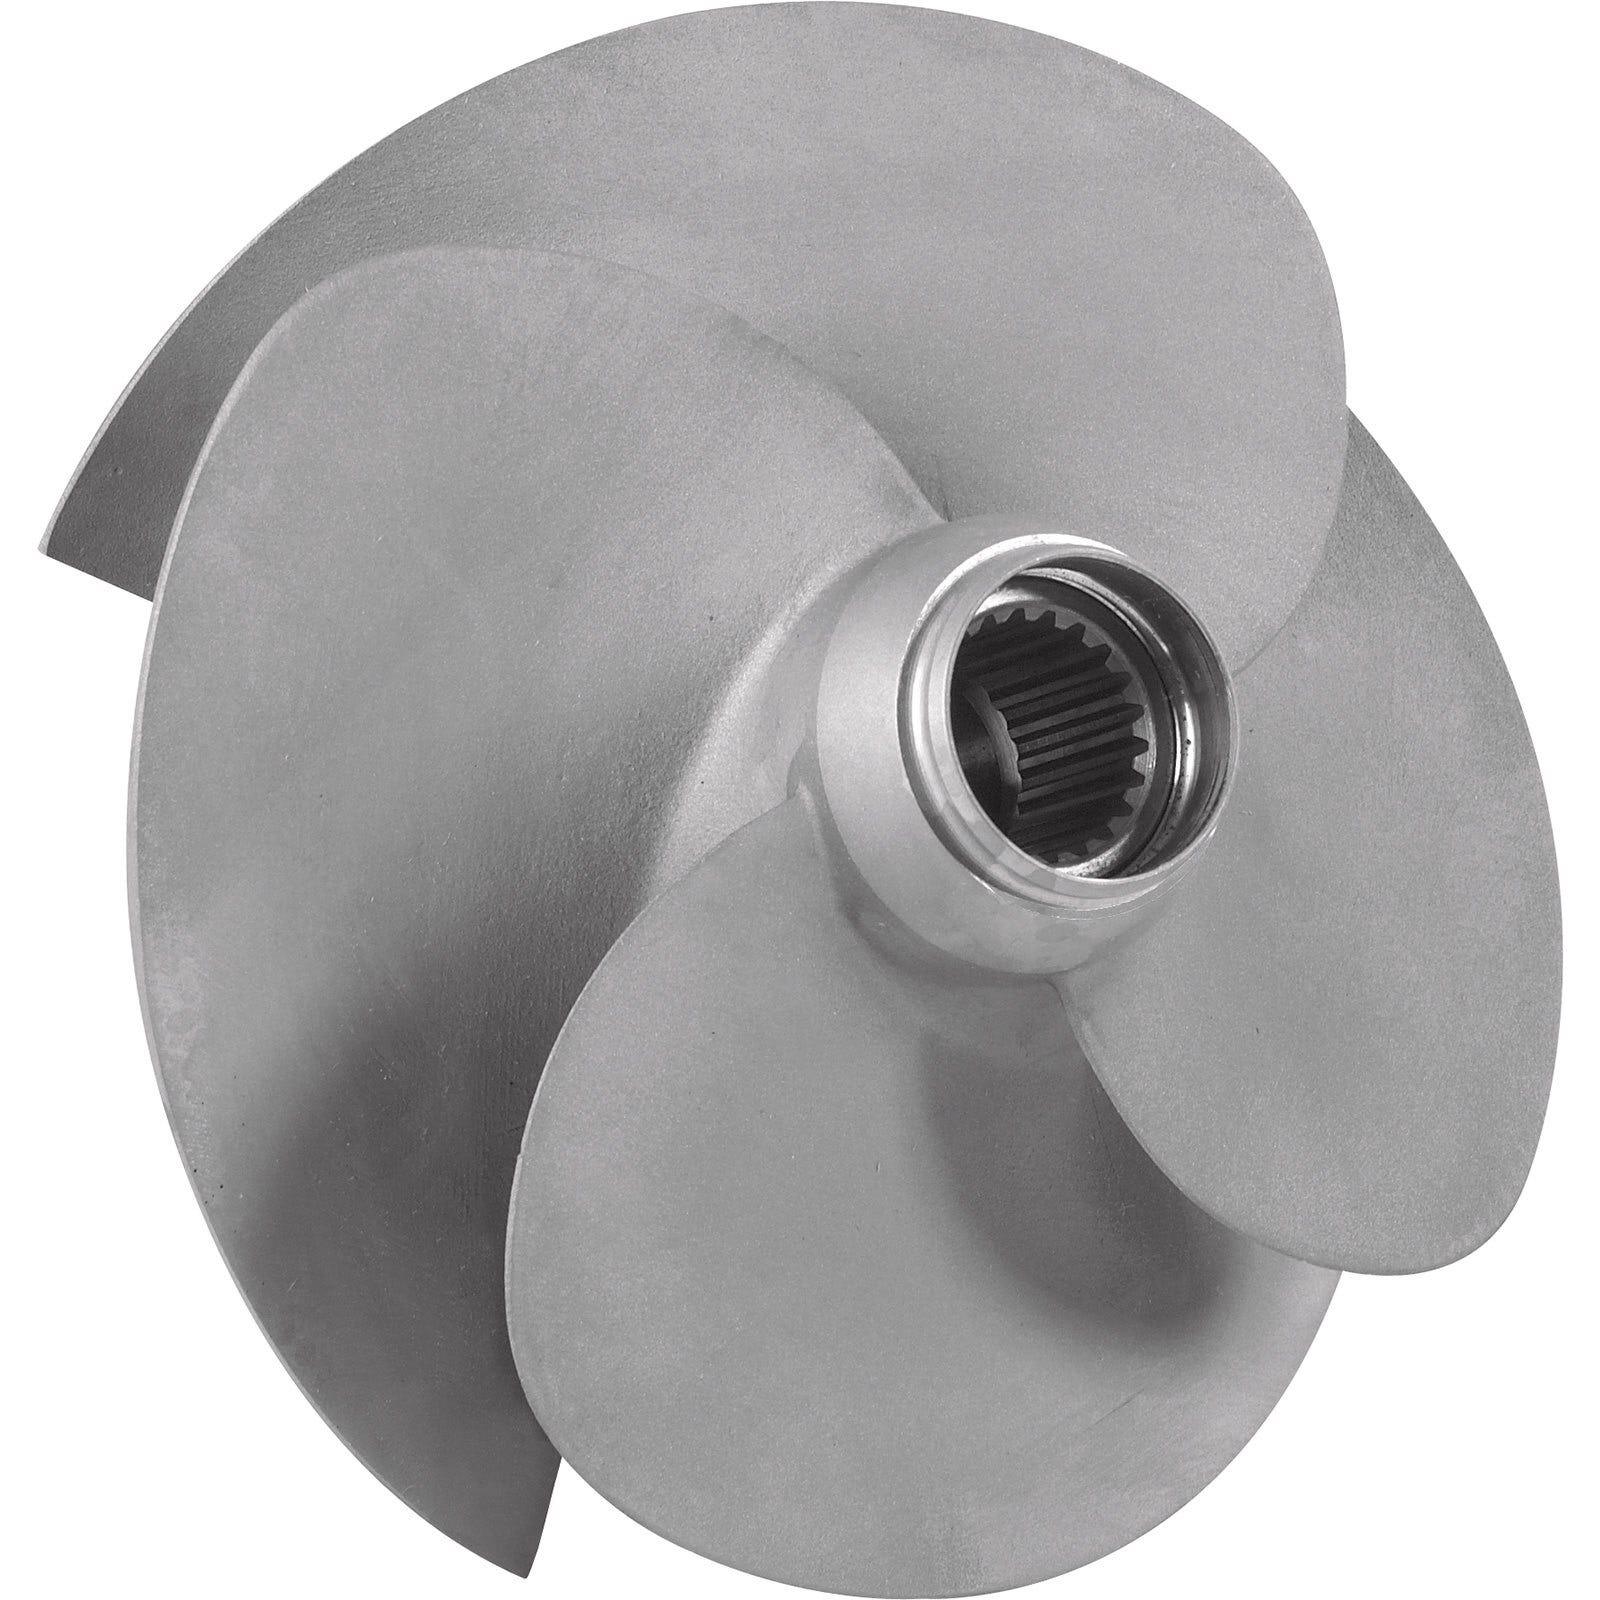 RXT-X (2010), RXT iS 255/260 (2009-2010) Impeller - Factory Recreation